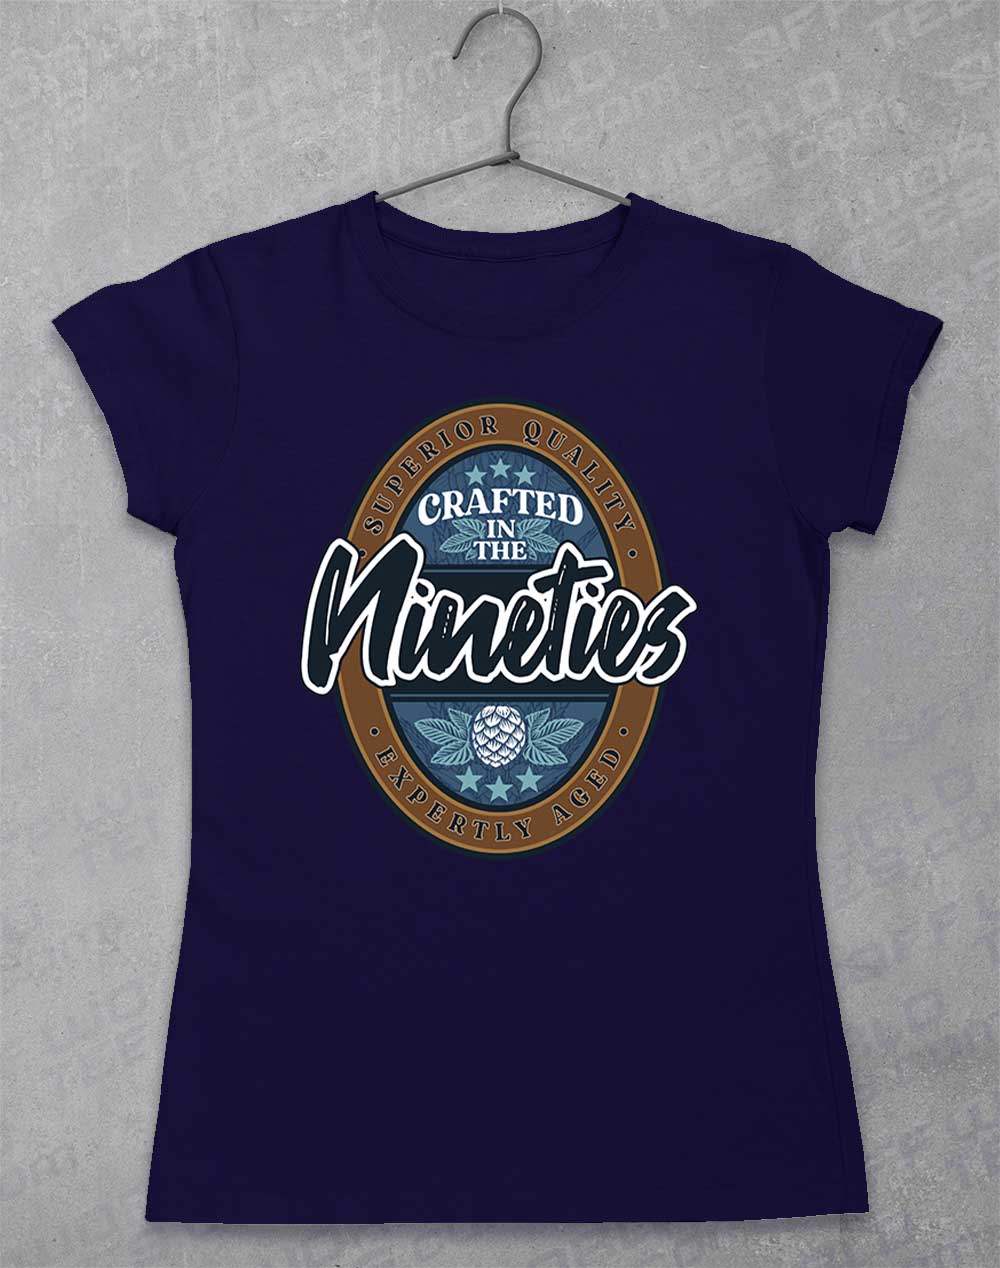 Crafted in the Nineties Women's T-Shirt